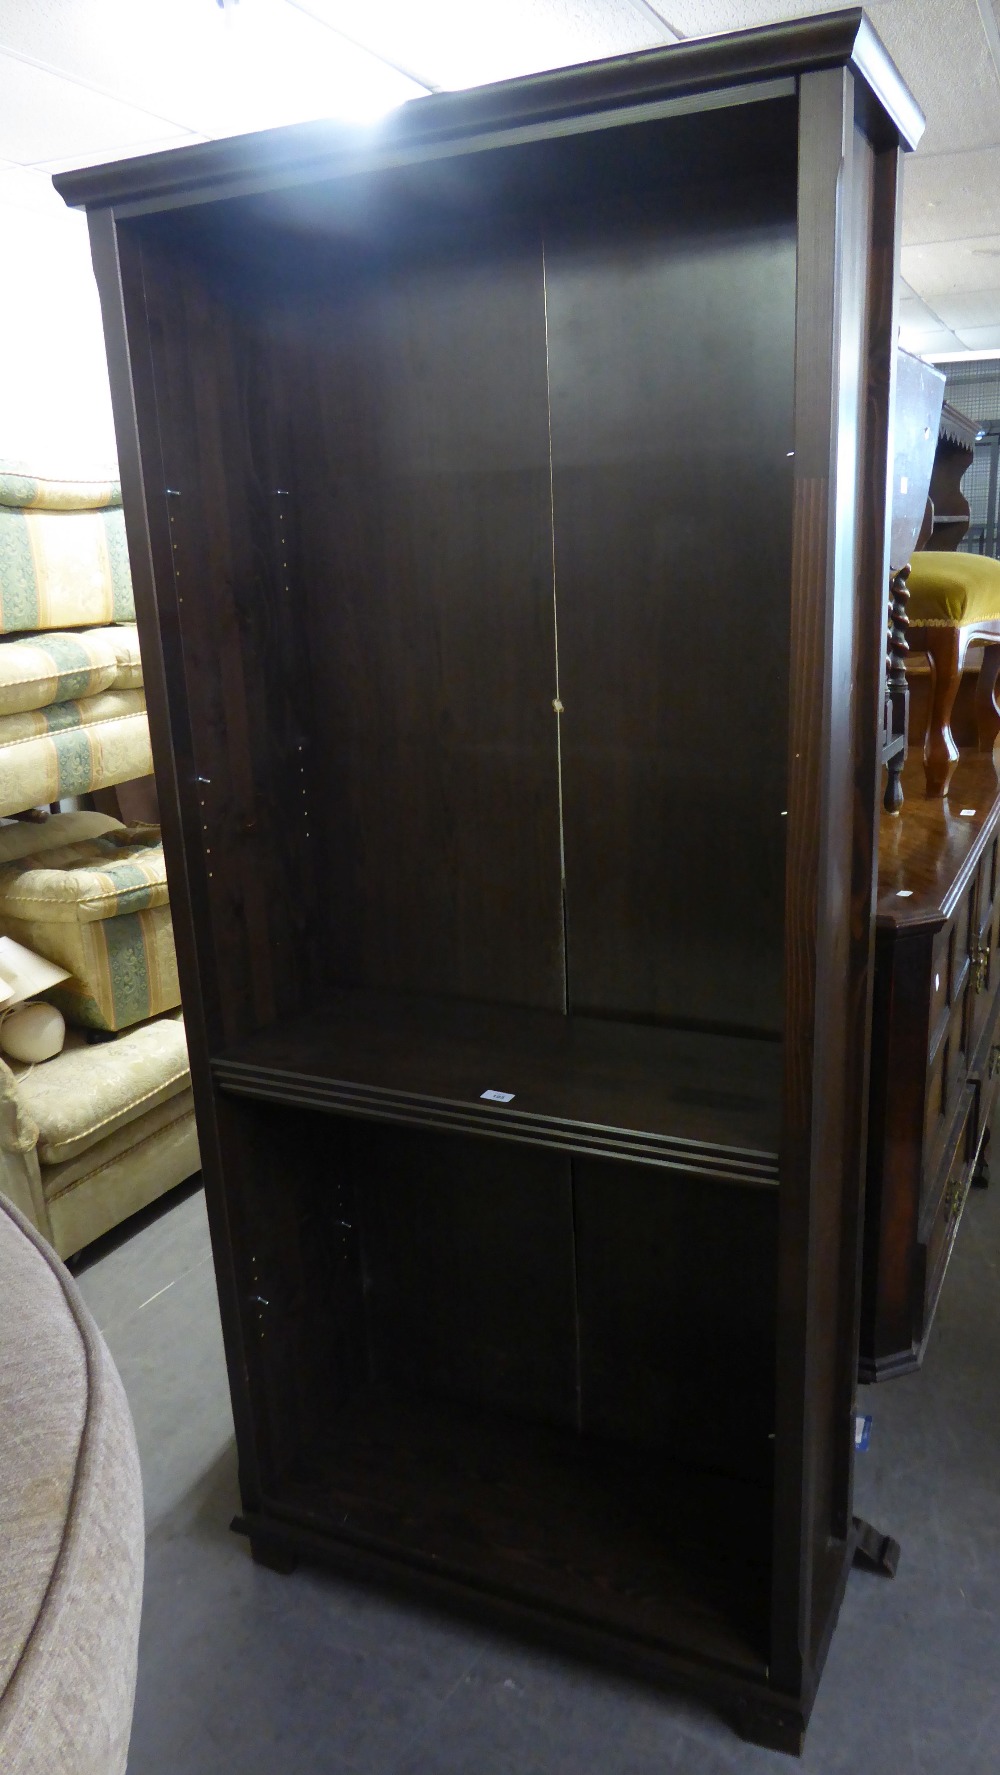 AN IKEA DARK STAINED LARGE OPEN BOOKCASE (86cm wide x 32cm deep x 191cm high)